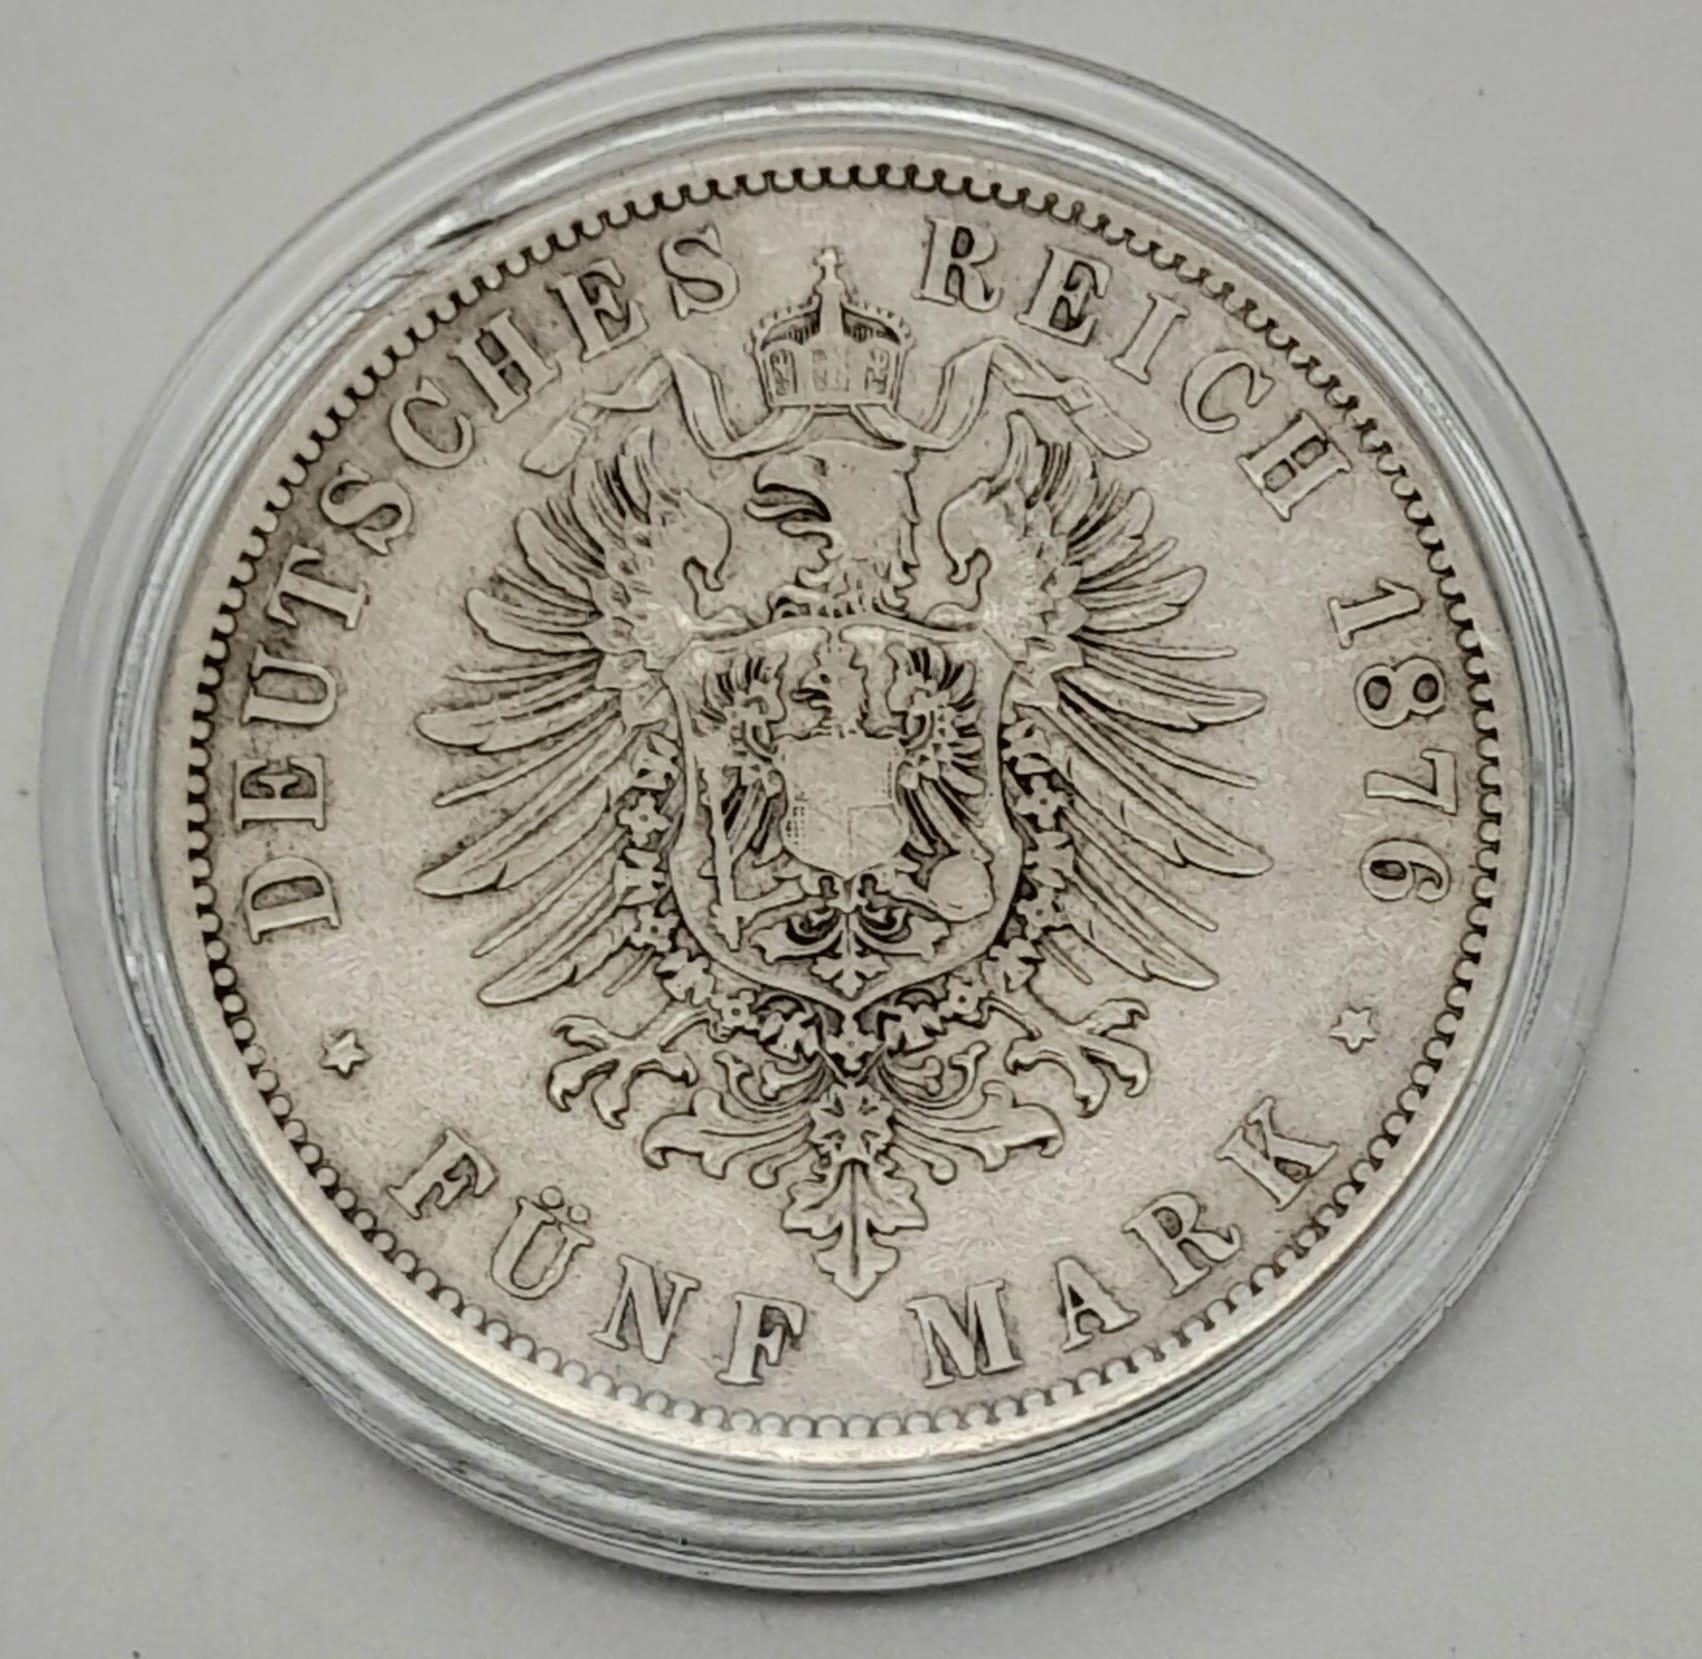 1876 Prussian 5 Mark, Wilhelm II, silver coin, CLEAR DEFINITION, SEE PHOTOS FOR CONDITION.